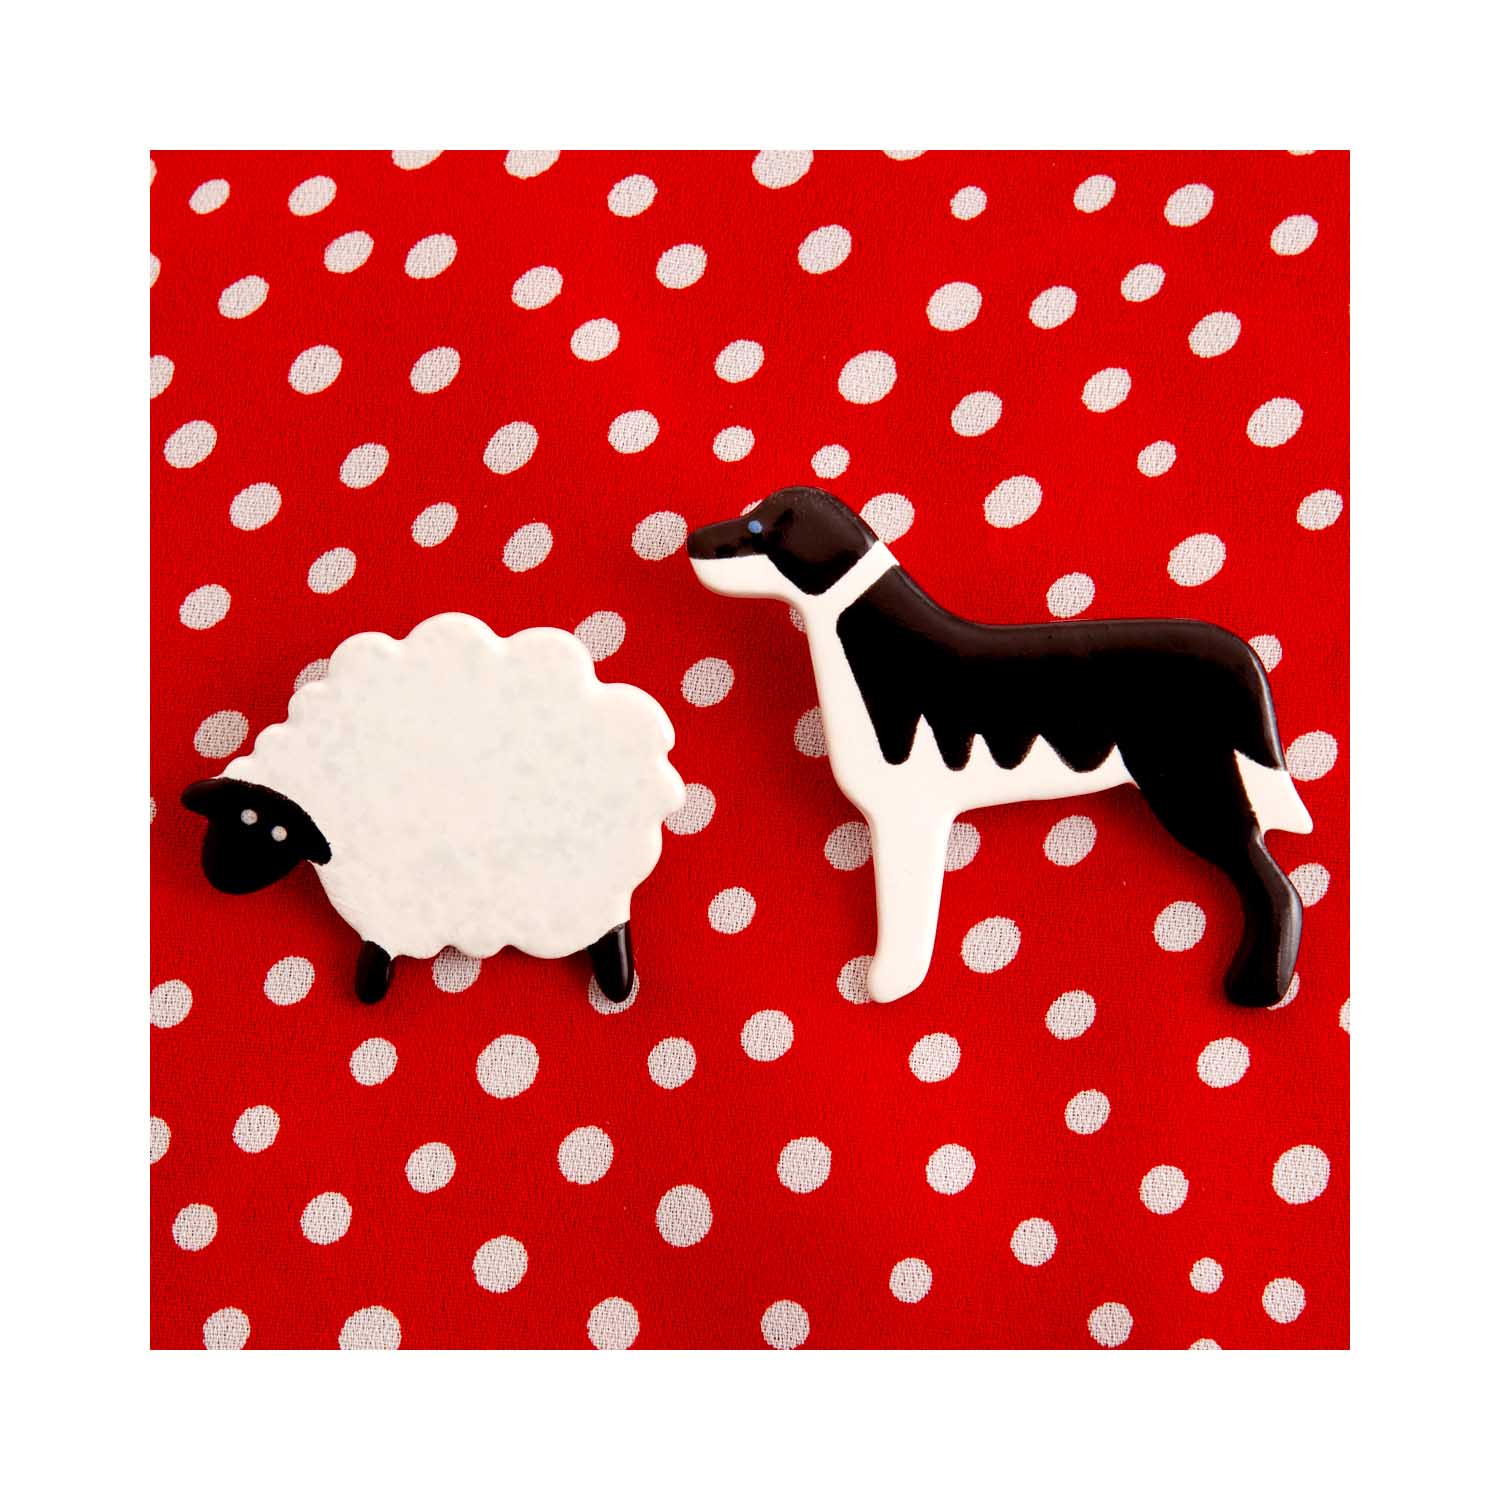 Dog Lover Gifts available at Dog Krazy Gifts – Ceramic Border Collie and Sheep Brooch Set by Mary Goldberg of Stockwell Ceramics, Just Part Of Our Collection Of Collie Dog Themed Gifts, Available At www.dogkrazygifts.co.uk